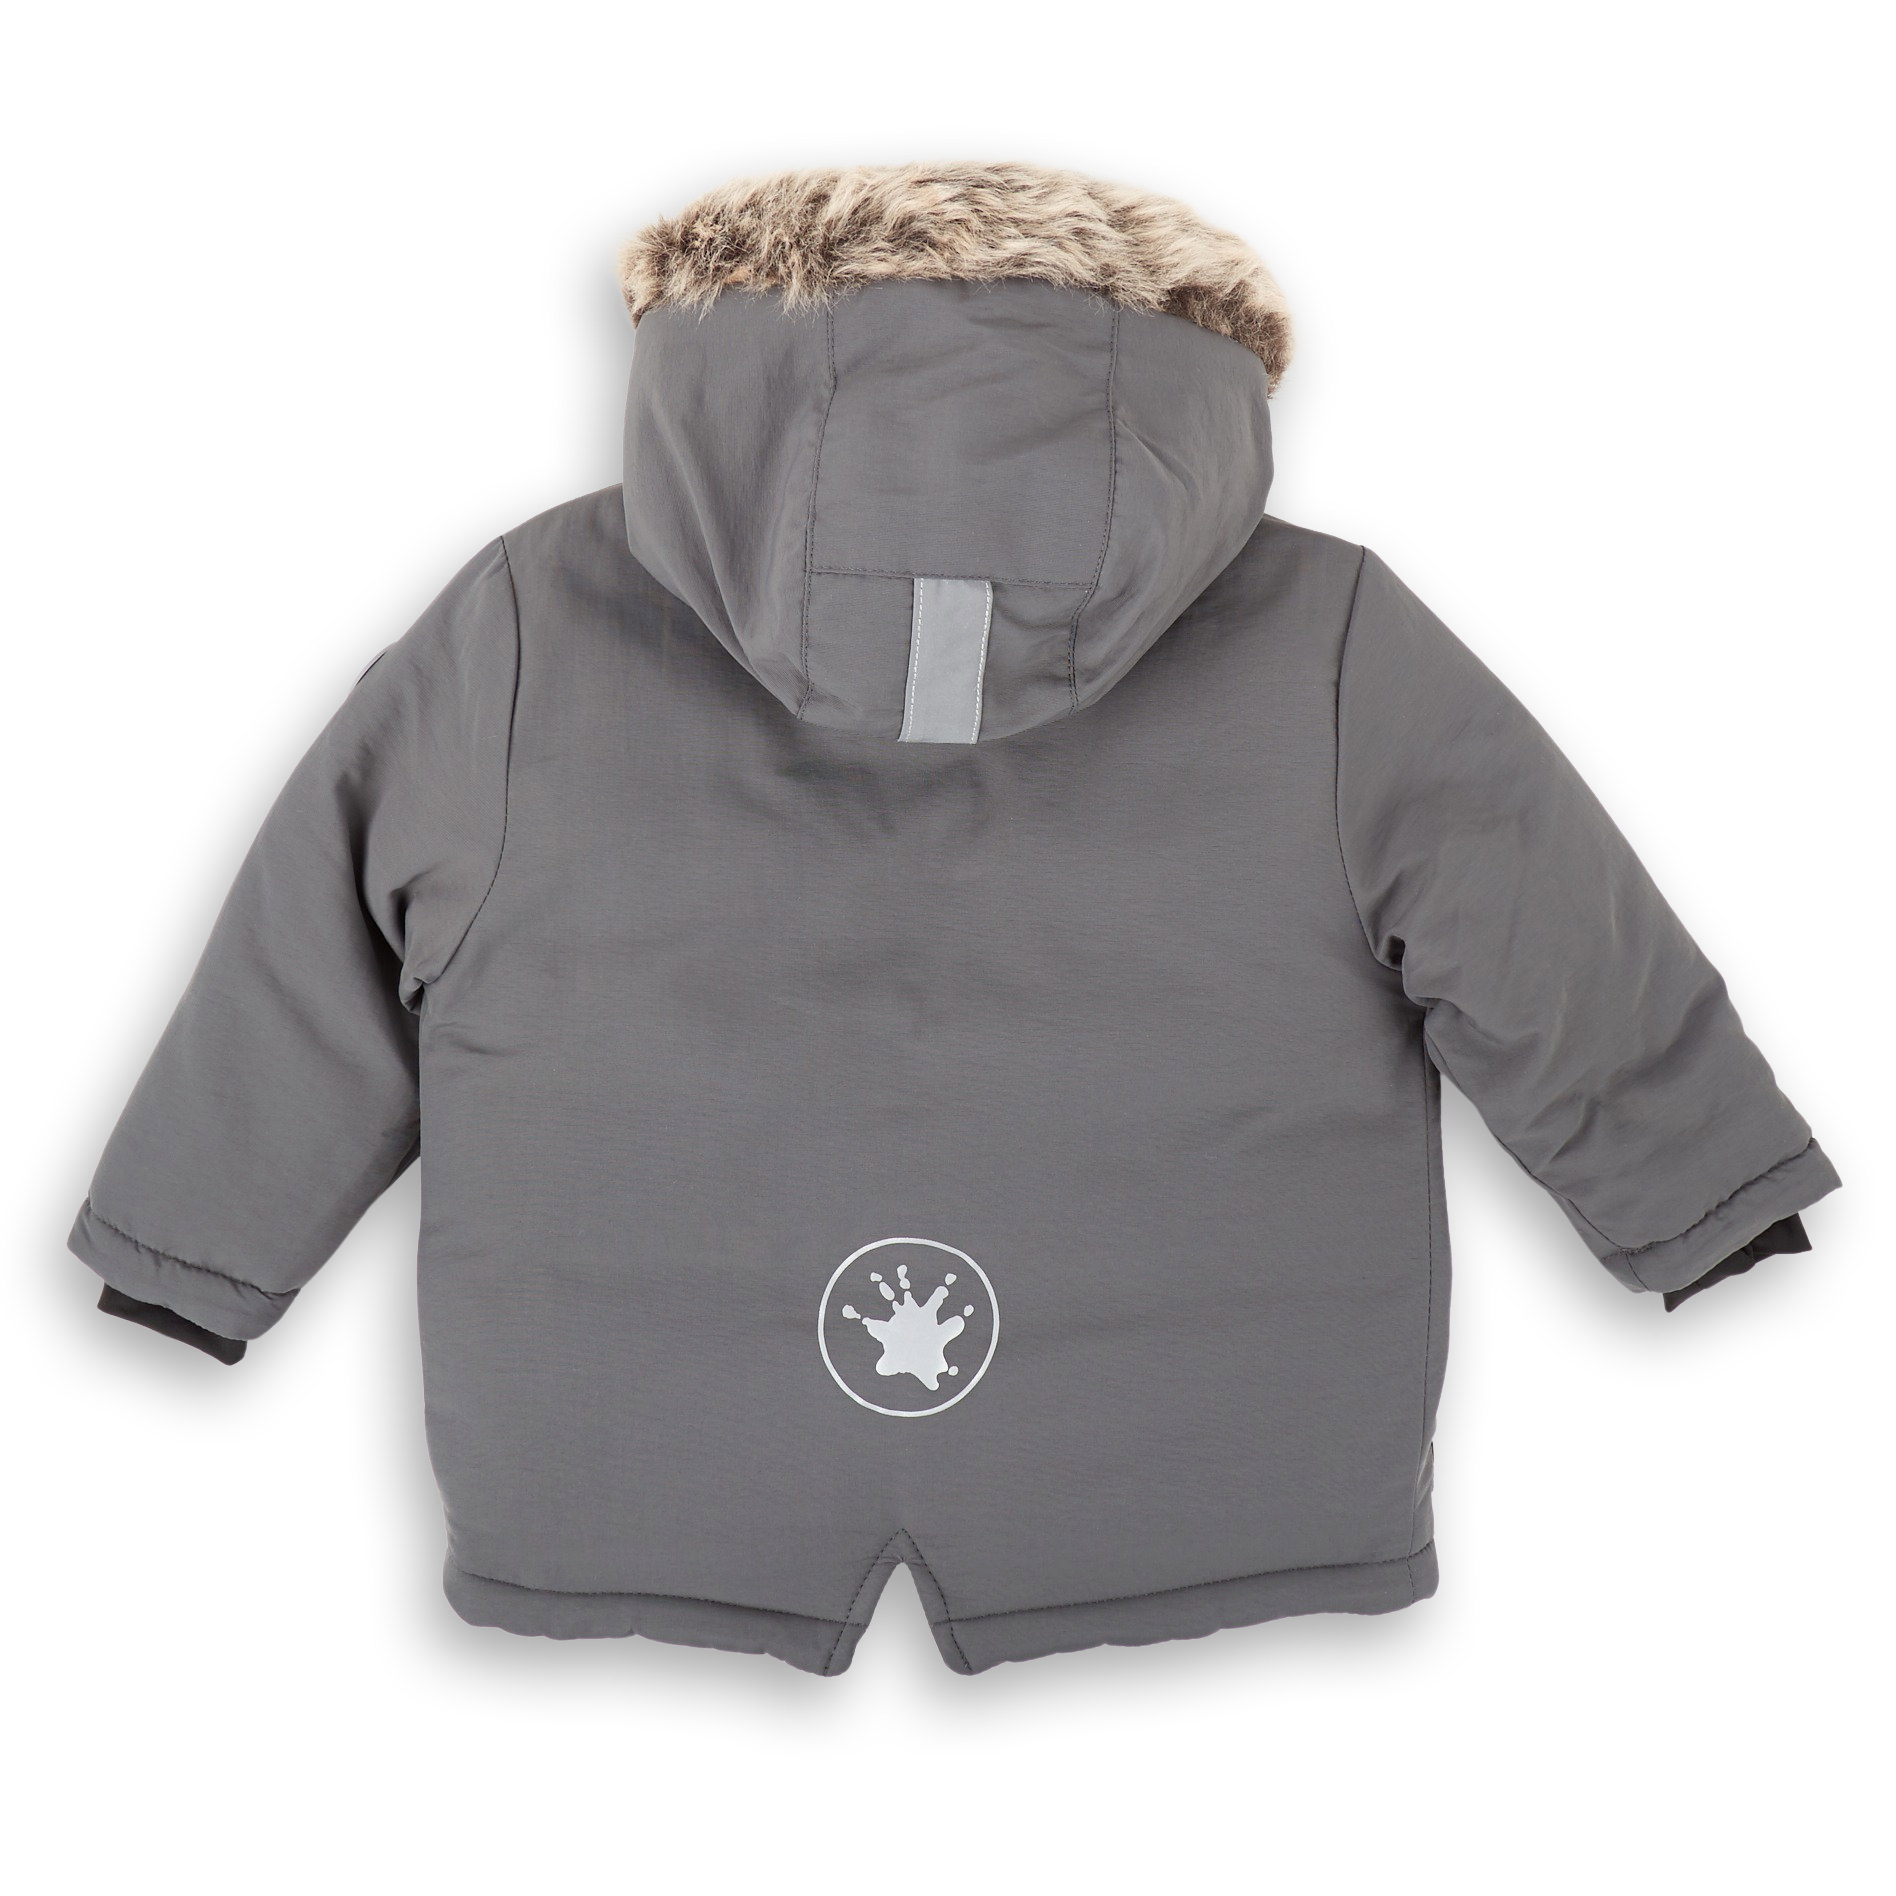 Insulated hooded winter jacket, dark grey, for babies and toddlers